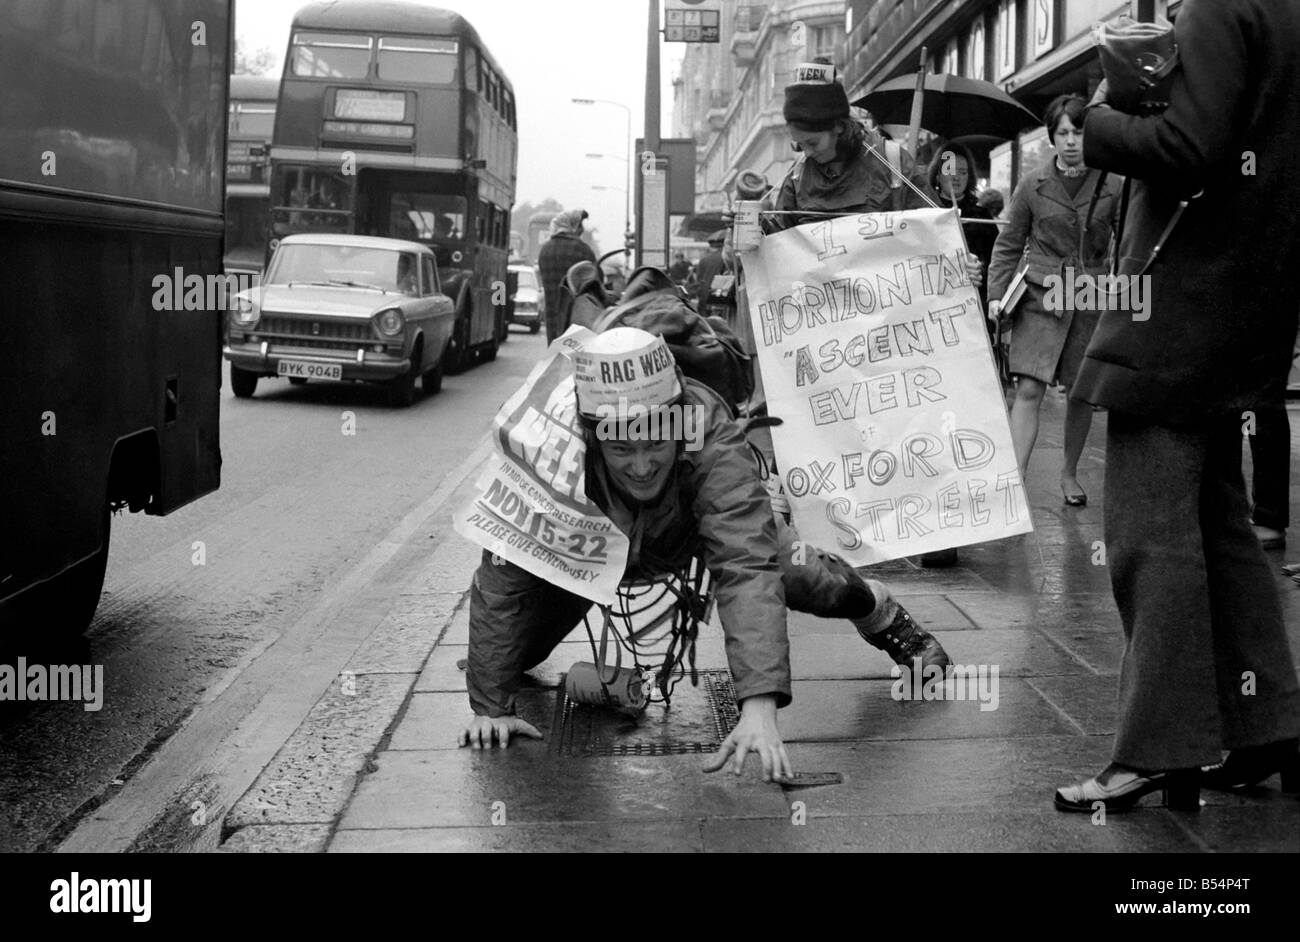 One of the six student mountaineers making a horizontal attempt on Oxford Street today, was John Phipps who comes from the College of Estate Management, Kensington. He inched his way from Marble Arch using cracks between paving stones to pull himself along - all in aid of the Cancer Research charity. John Phipps doing his climb up the Pavement November 1969 Z11239-002 Stock Photo